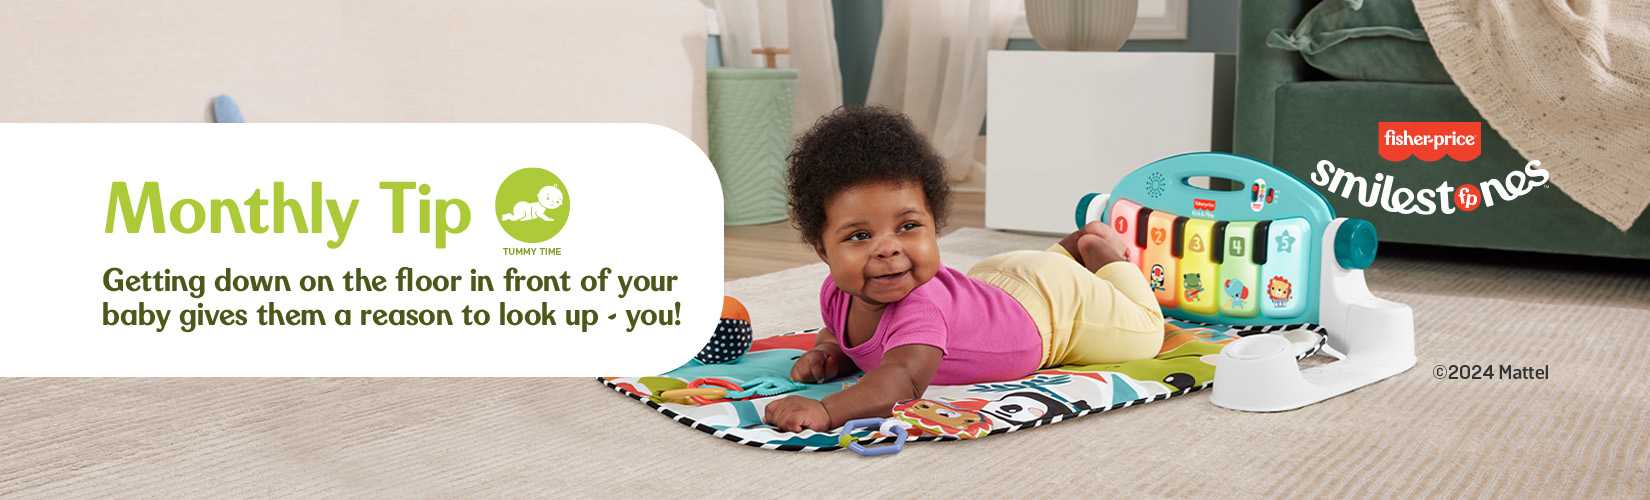 Fisherprice smilestones. Monthly tip. Getting down on the floor in front of your baby gives them a reason to look up - you!